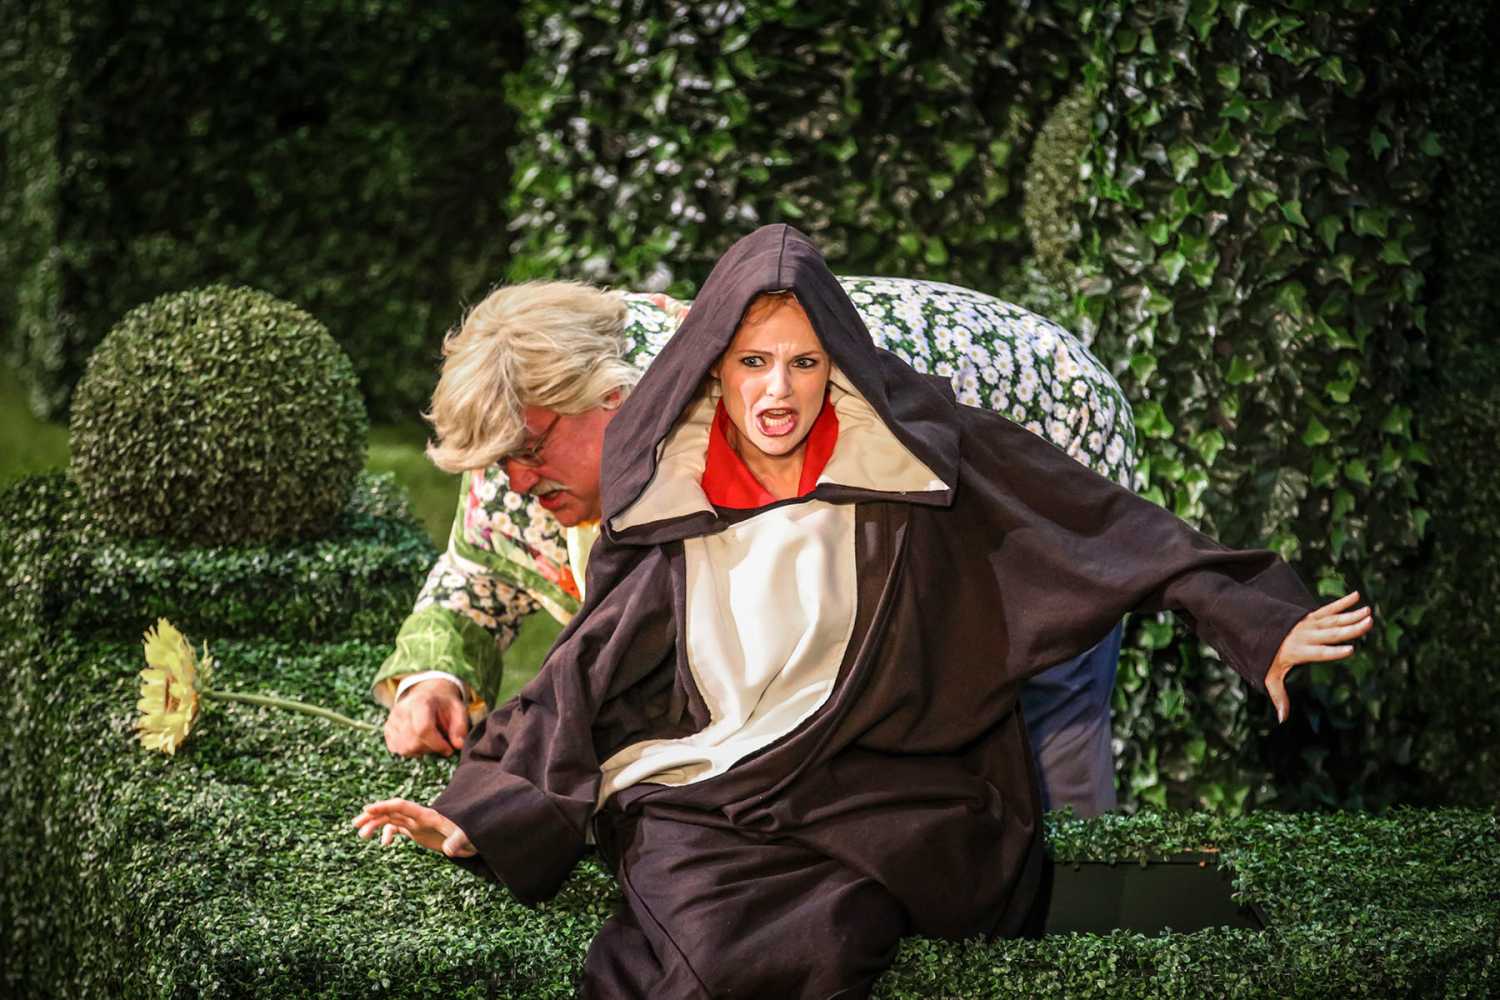 The production is staged in the gardens of the 16th century castle (photo: Patrick Smets)